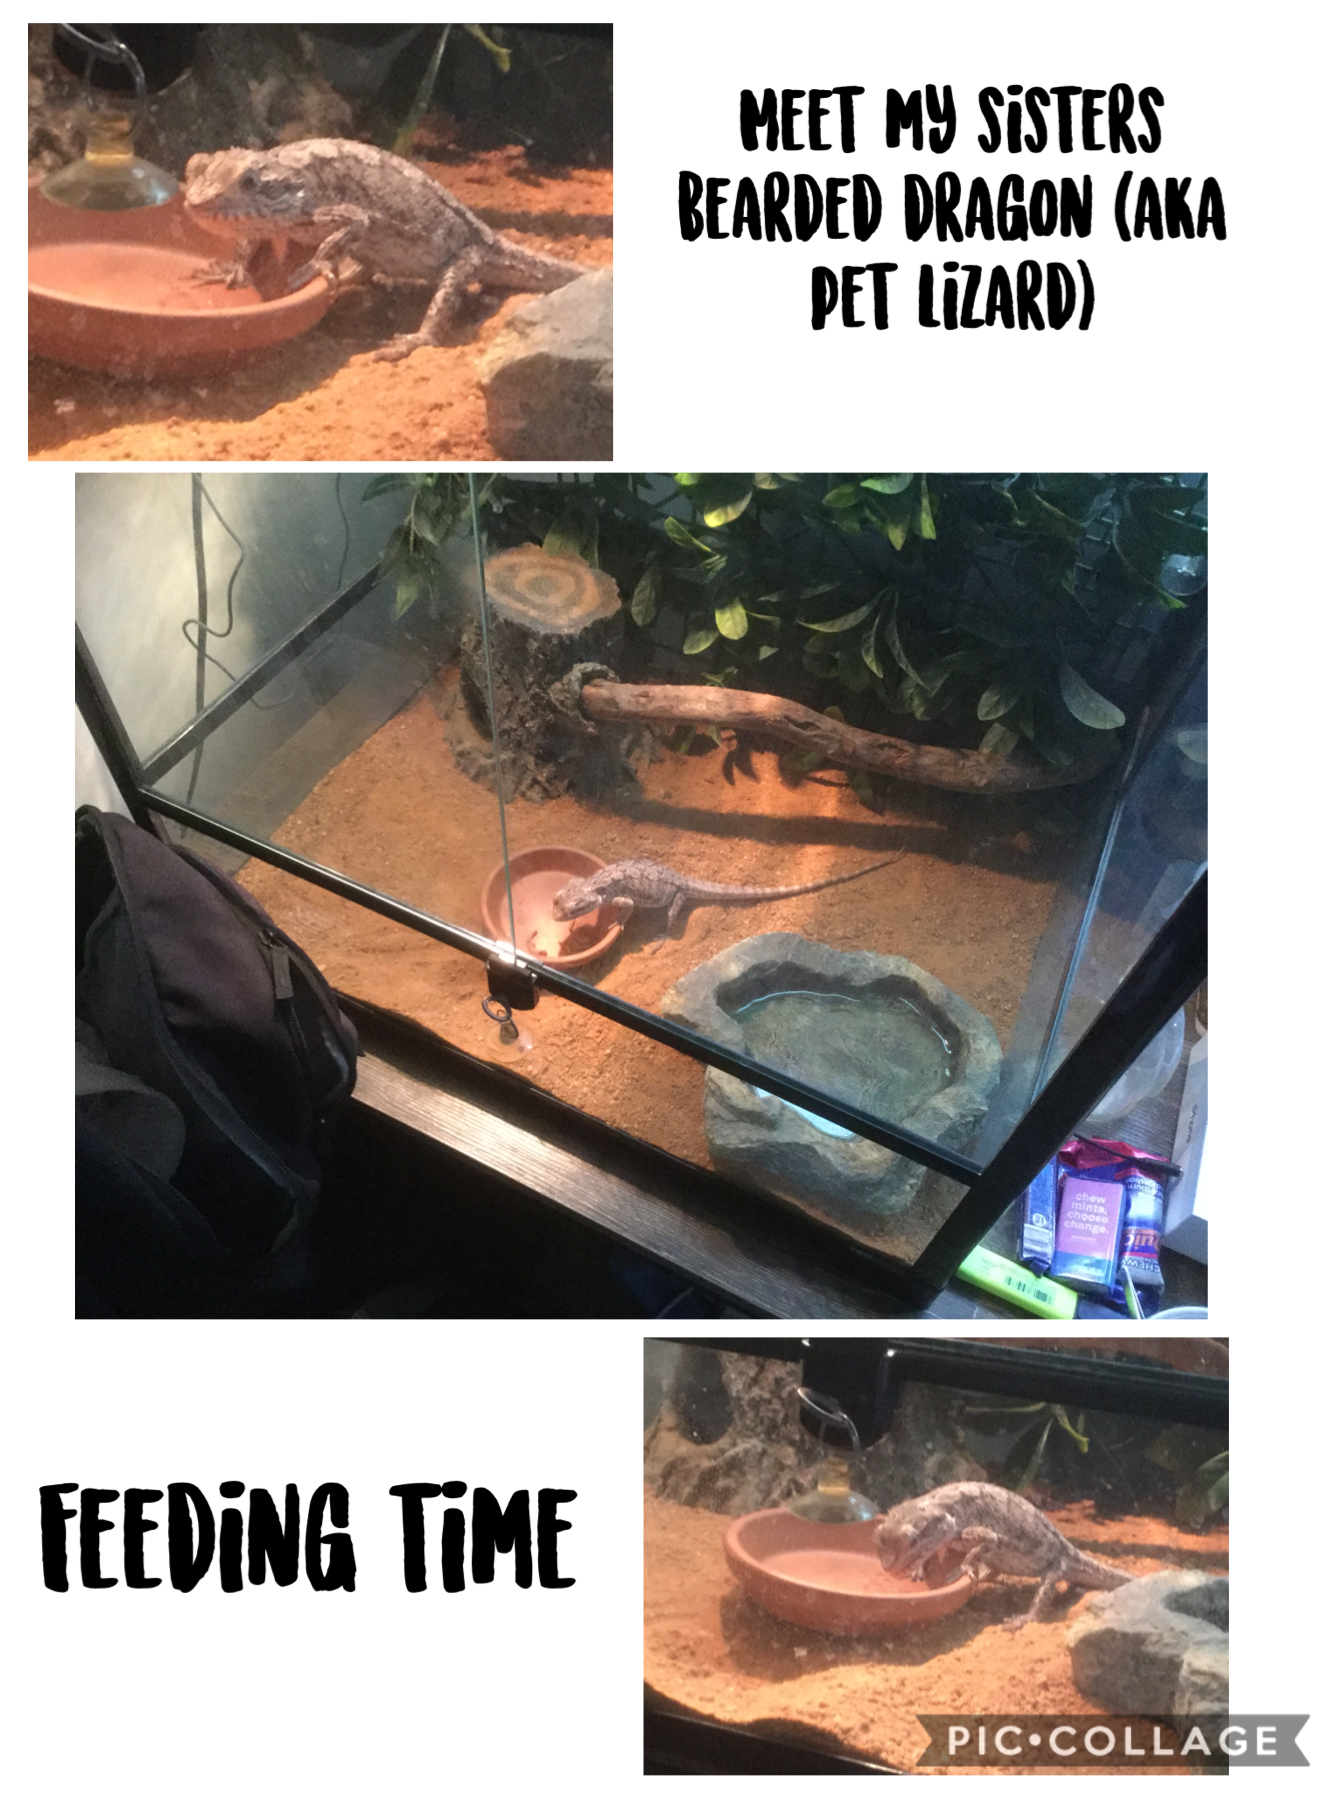 Meet my sisters pet ❤️ I took these photos when I fed her